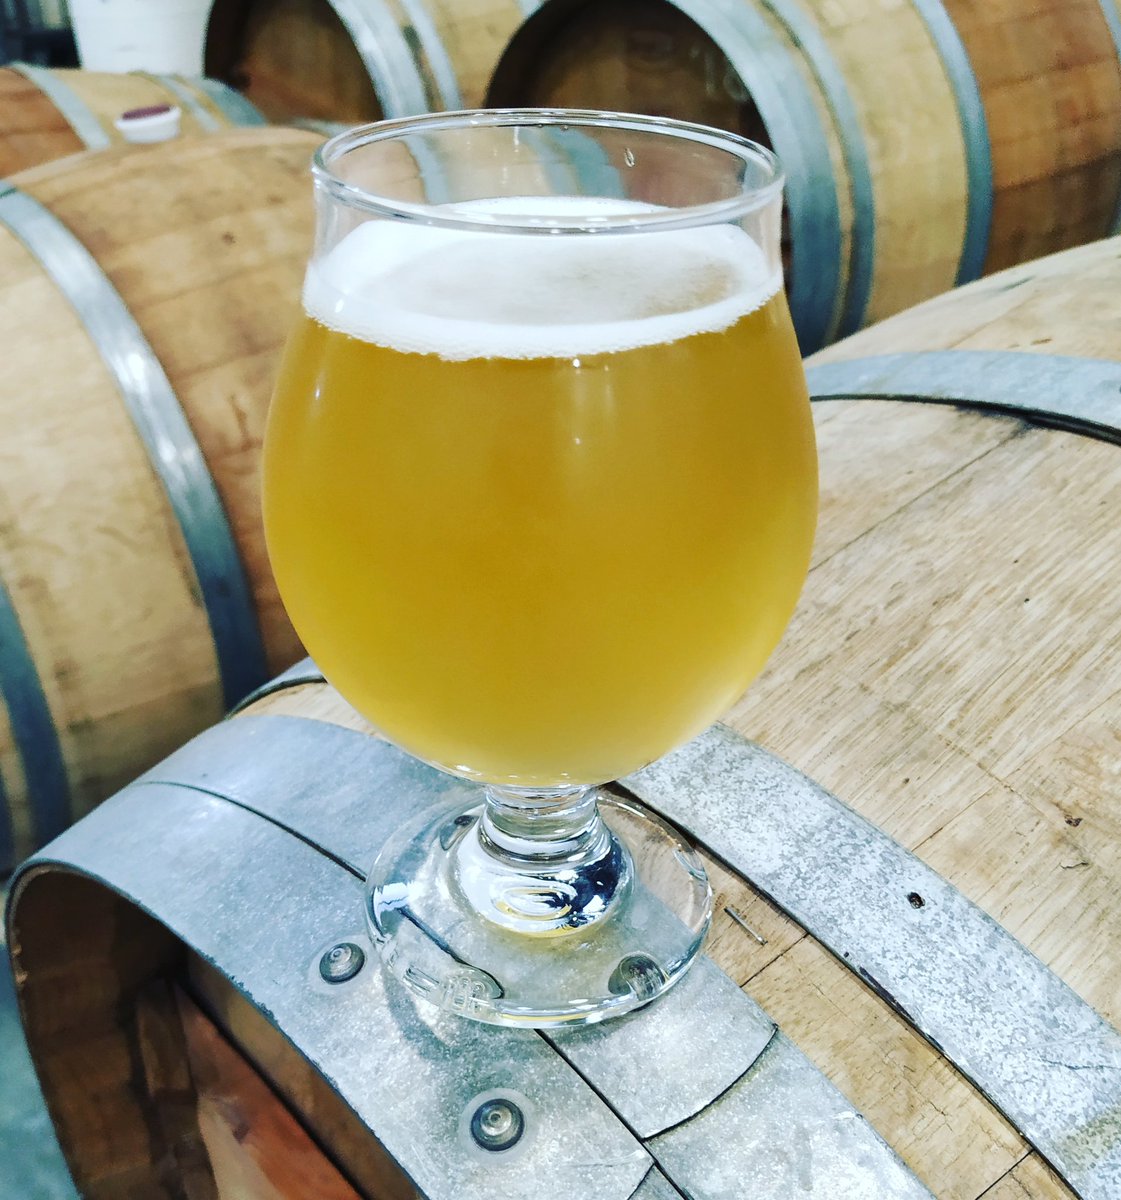 But ....we also filled a barrel from @windfallcider, and aged it for 6 months. And it's on tap NOW in the tasting room. It's picked up some nice tart sourness from the apple cider, and some oak tannins from the barrel. It is delicious!

#BarrelAged #OnTapNow #SupportLocal